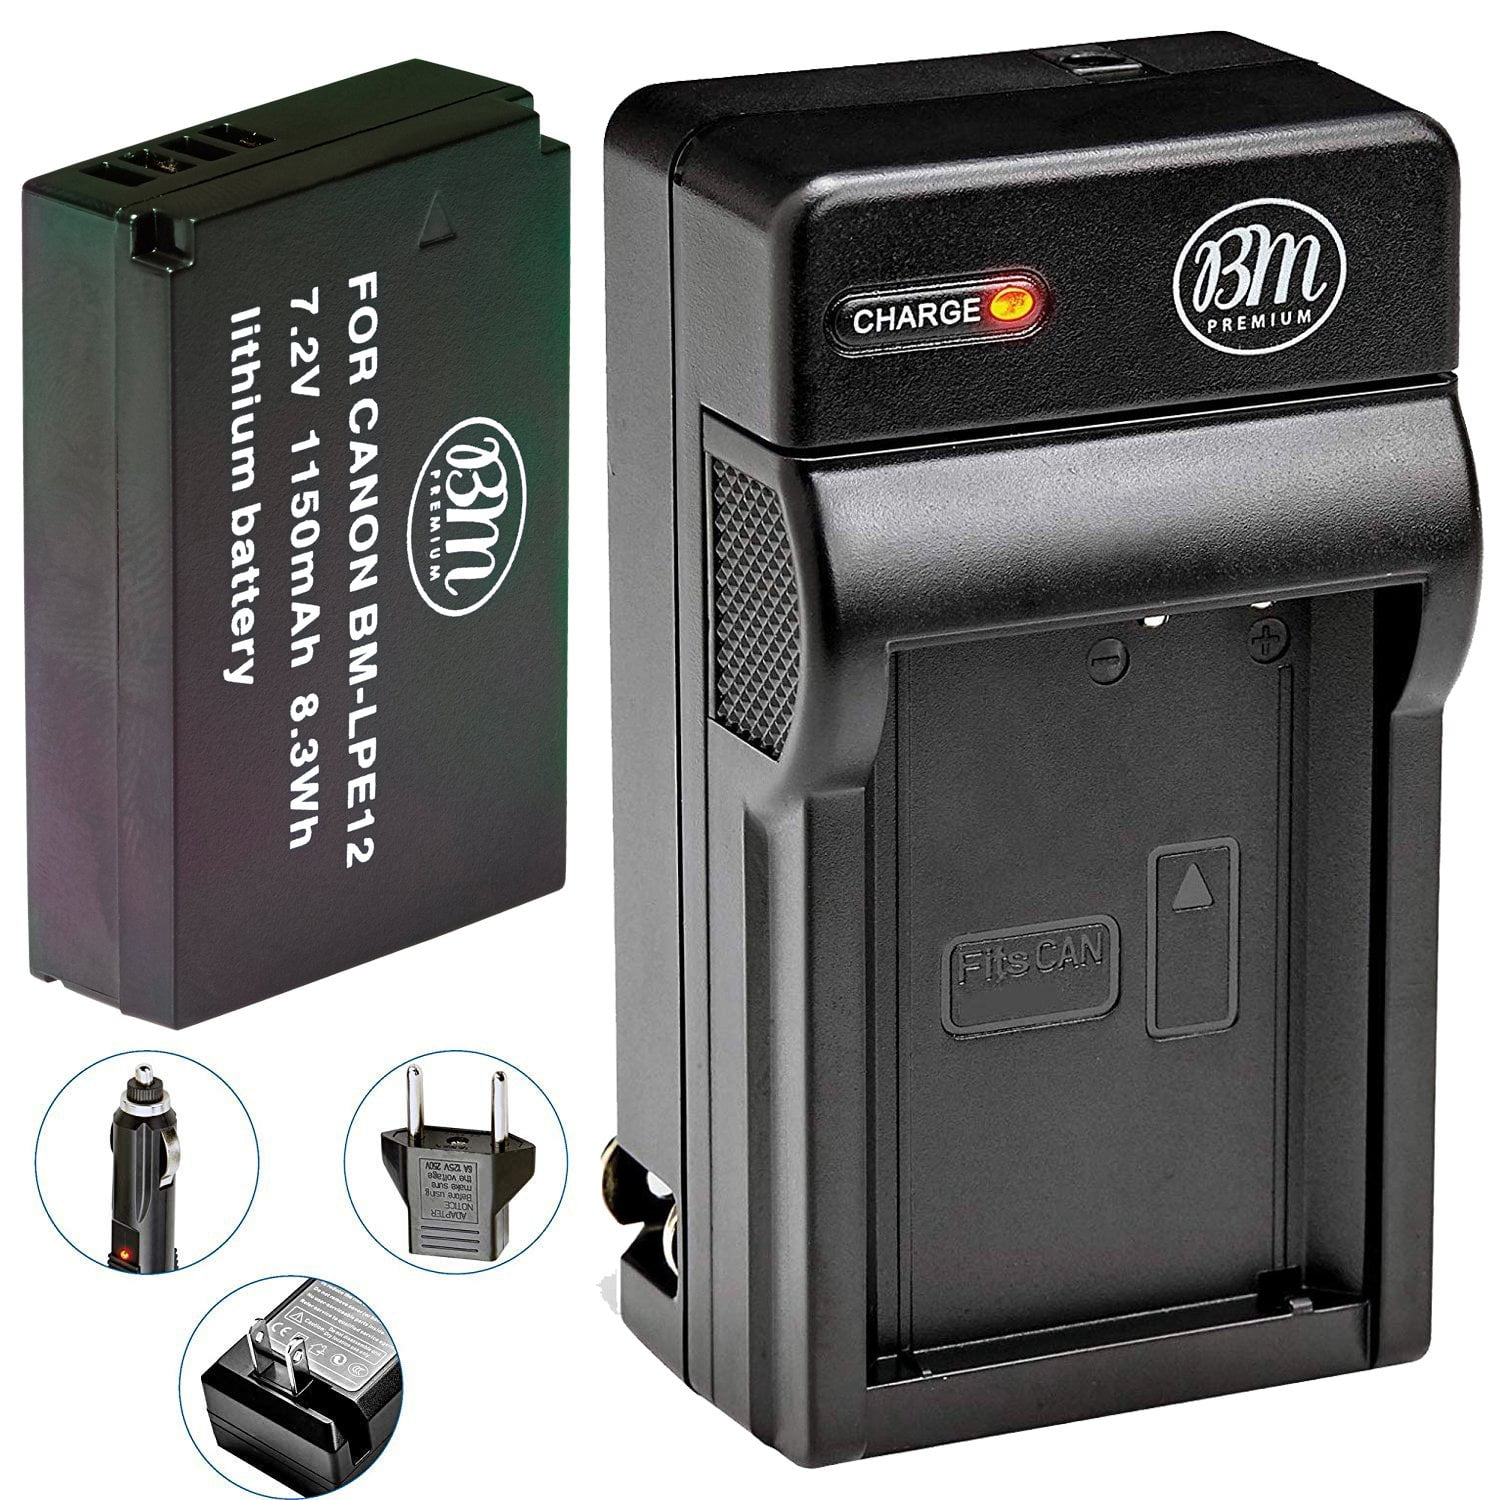 BM Premium LP E Battery and Charger Kit for Canon EOS M, EOS M2